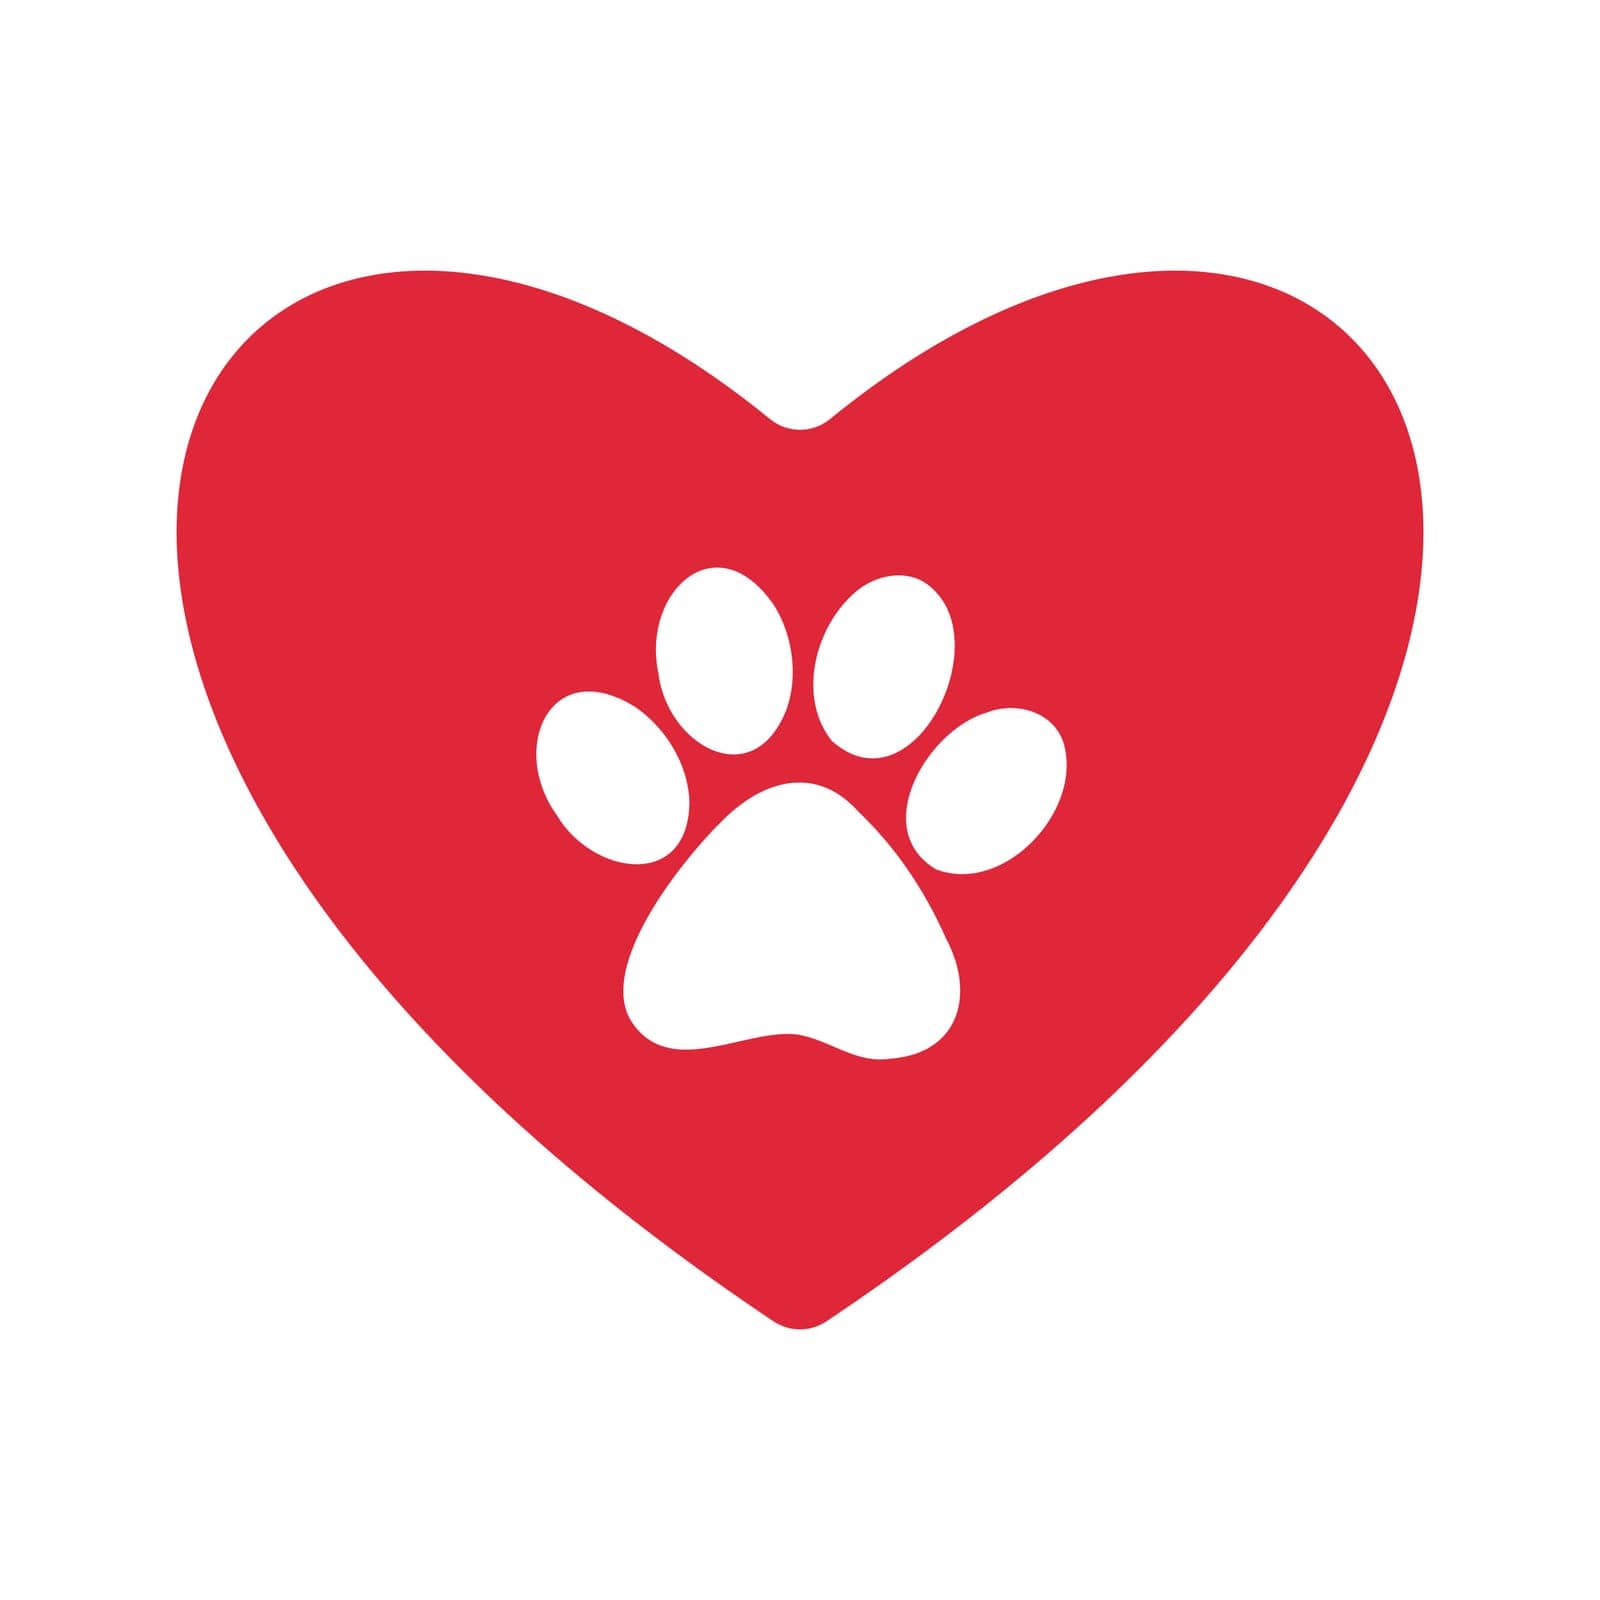 Pet friendly greeting or informational sign, label, sticker. White animal paw print in red heart